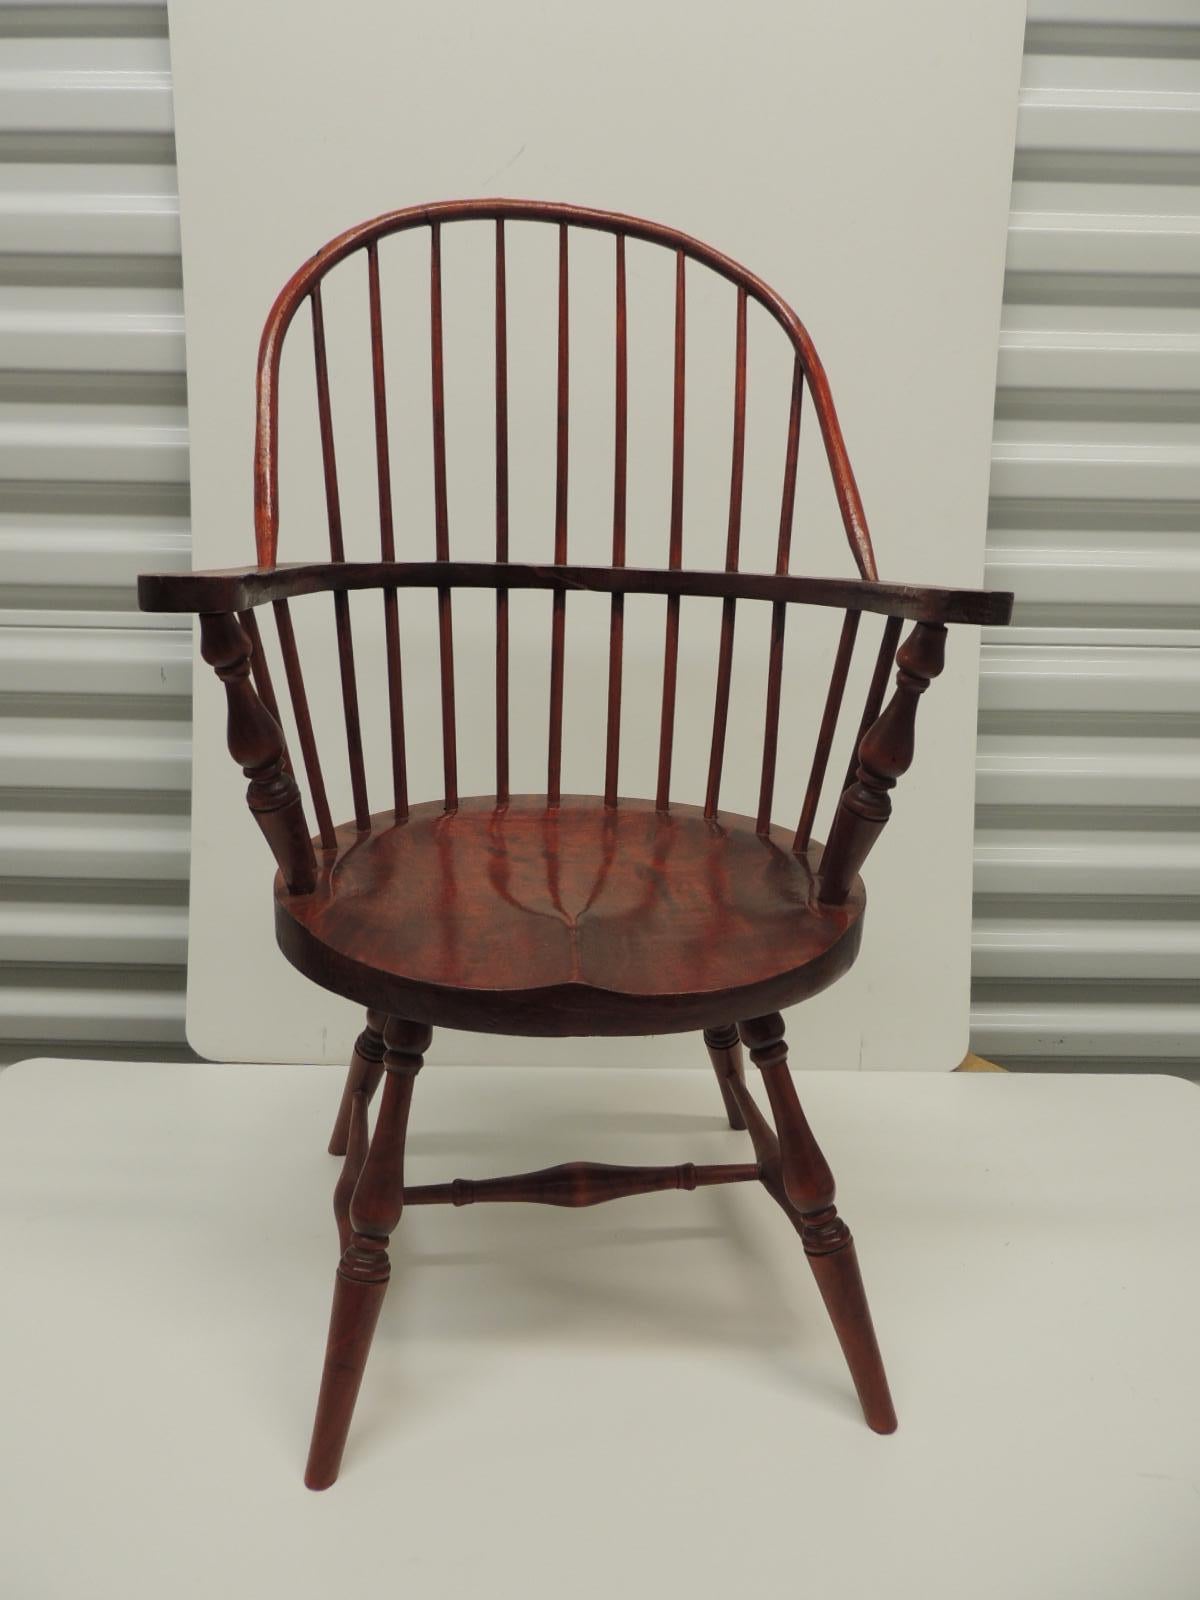 Vintage child's Windsor armchair.
Wood sturdy chair with oval seat and oval back, stained a reddish cherry color.
Size: 14 W x 9.5 SH x 13 D x 23 BH x 9 SD.